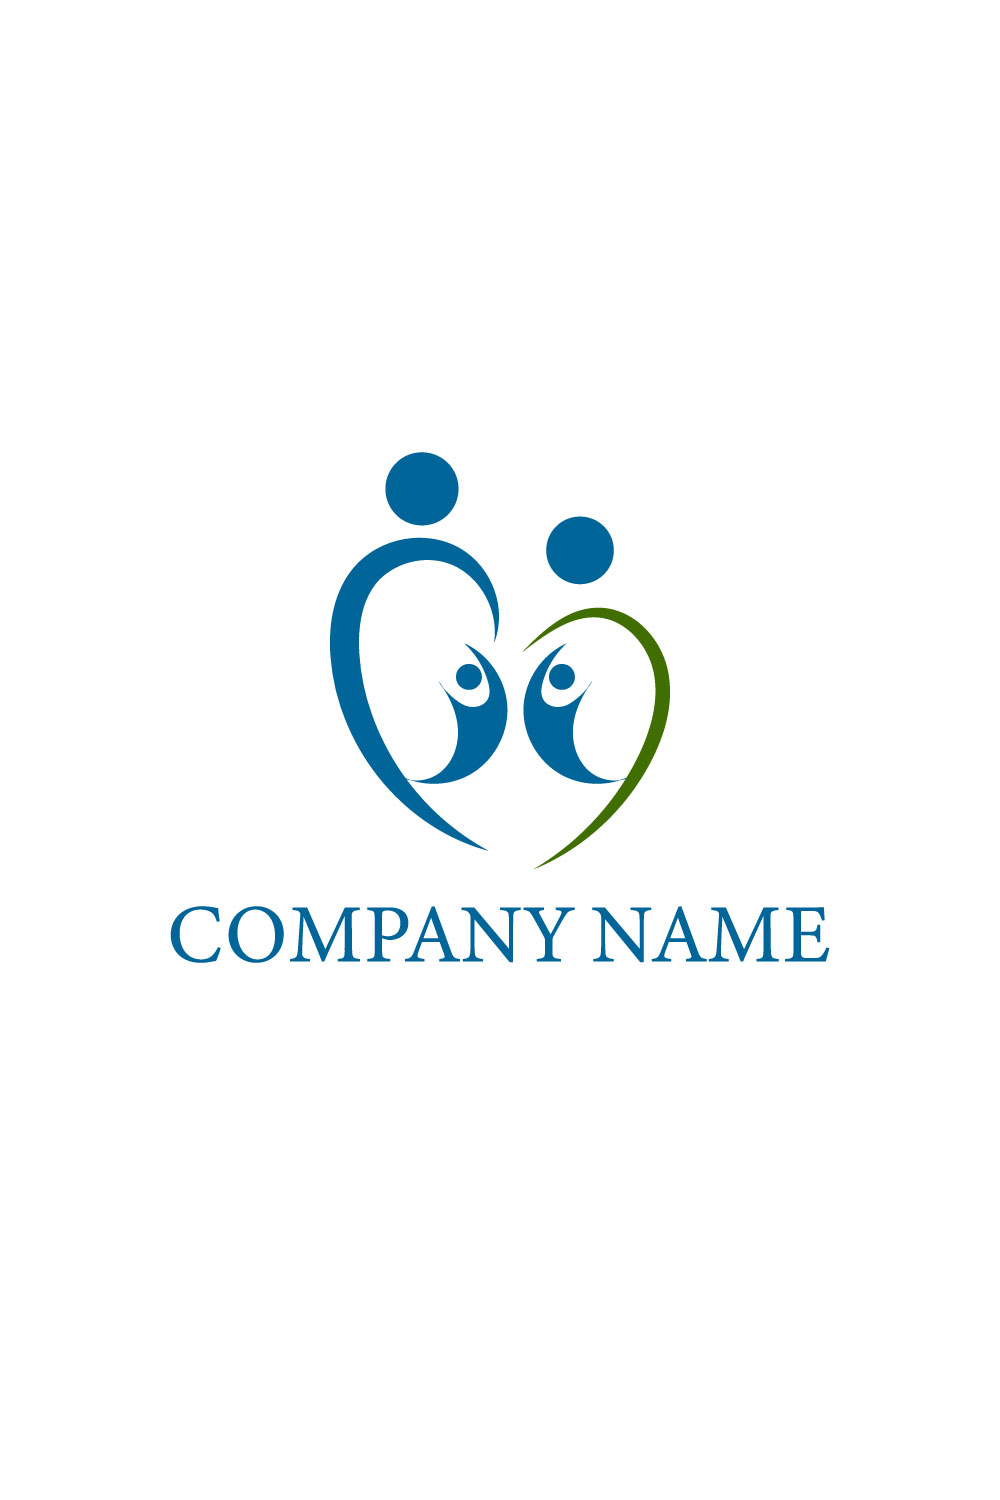 Free Medical care logo pinterest preview image.